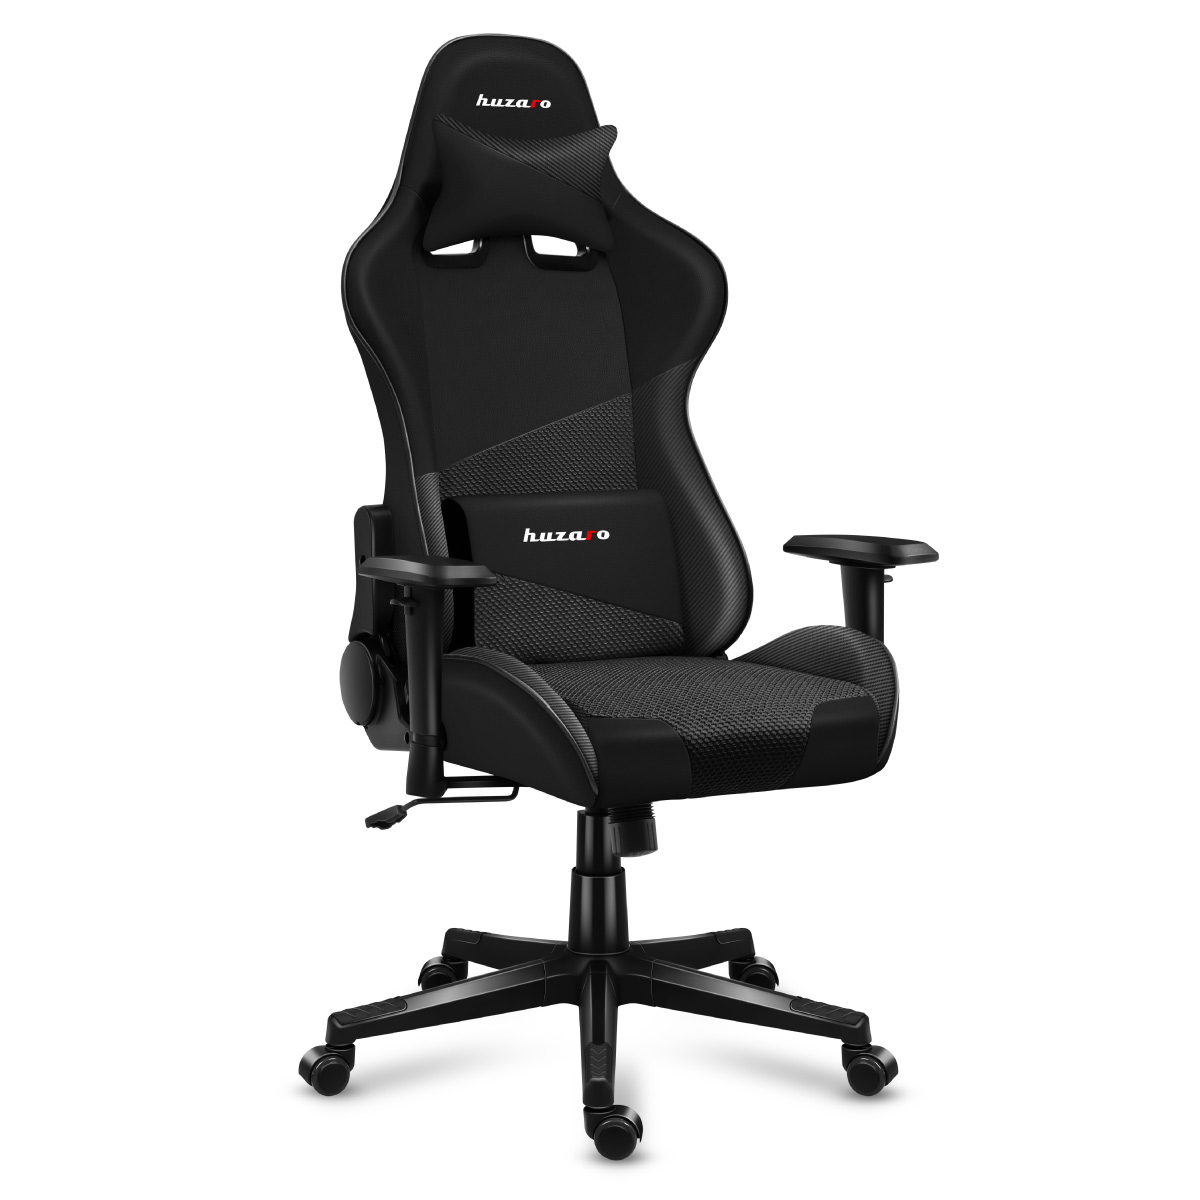 Huzaro Force 6.2 Carbon gaming chair